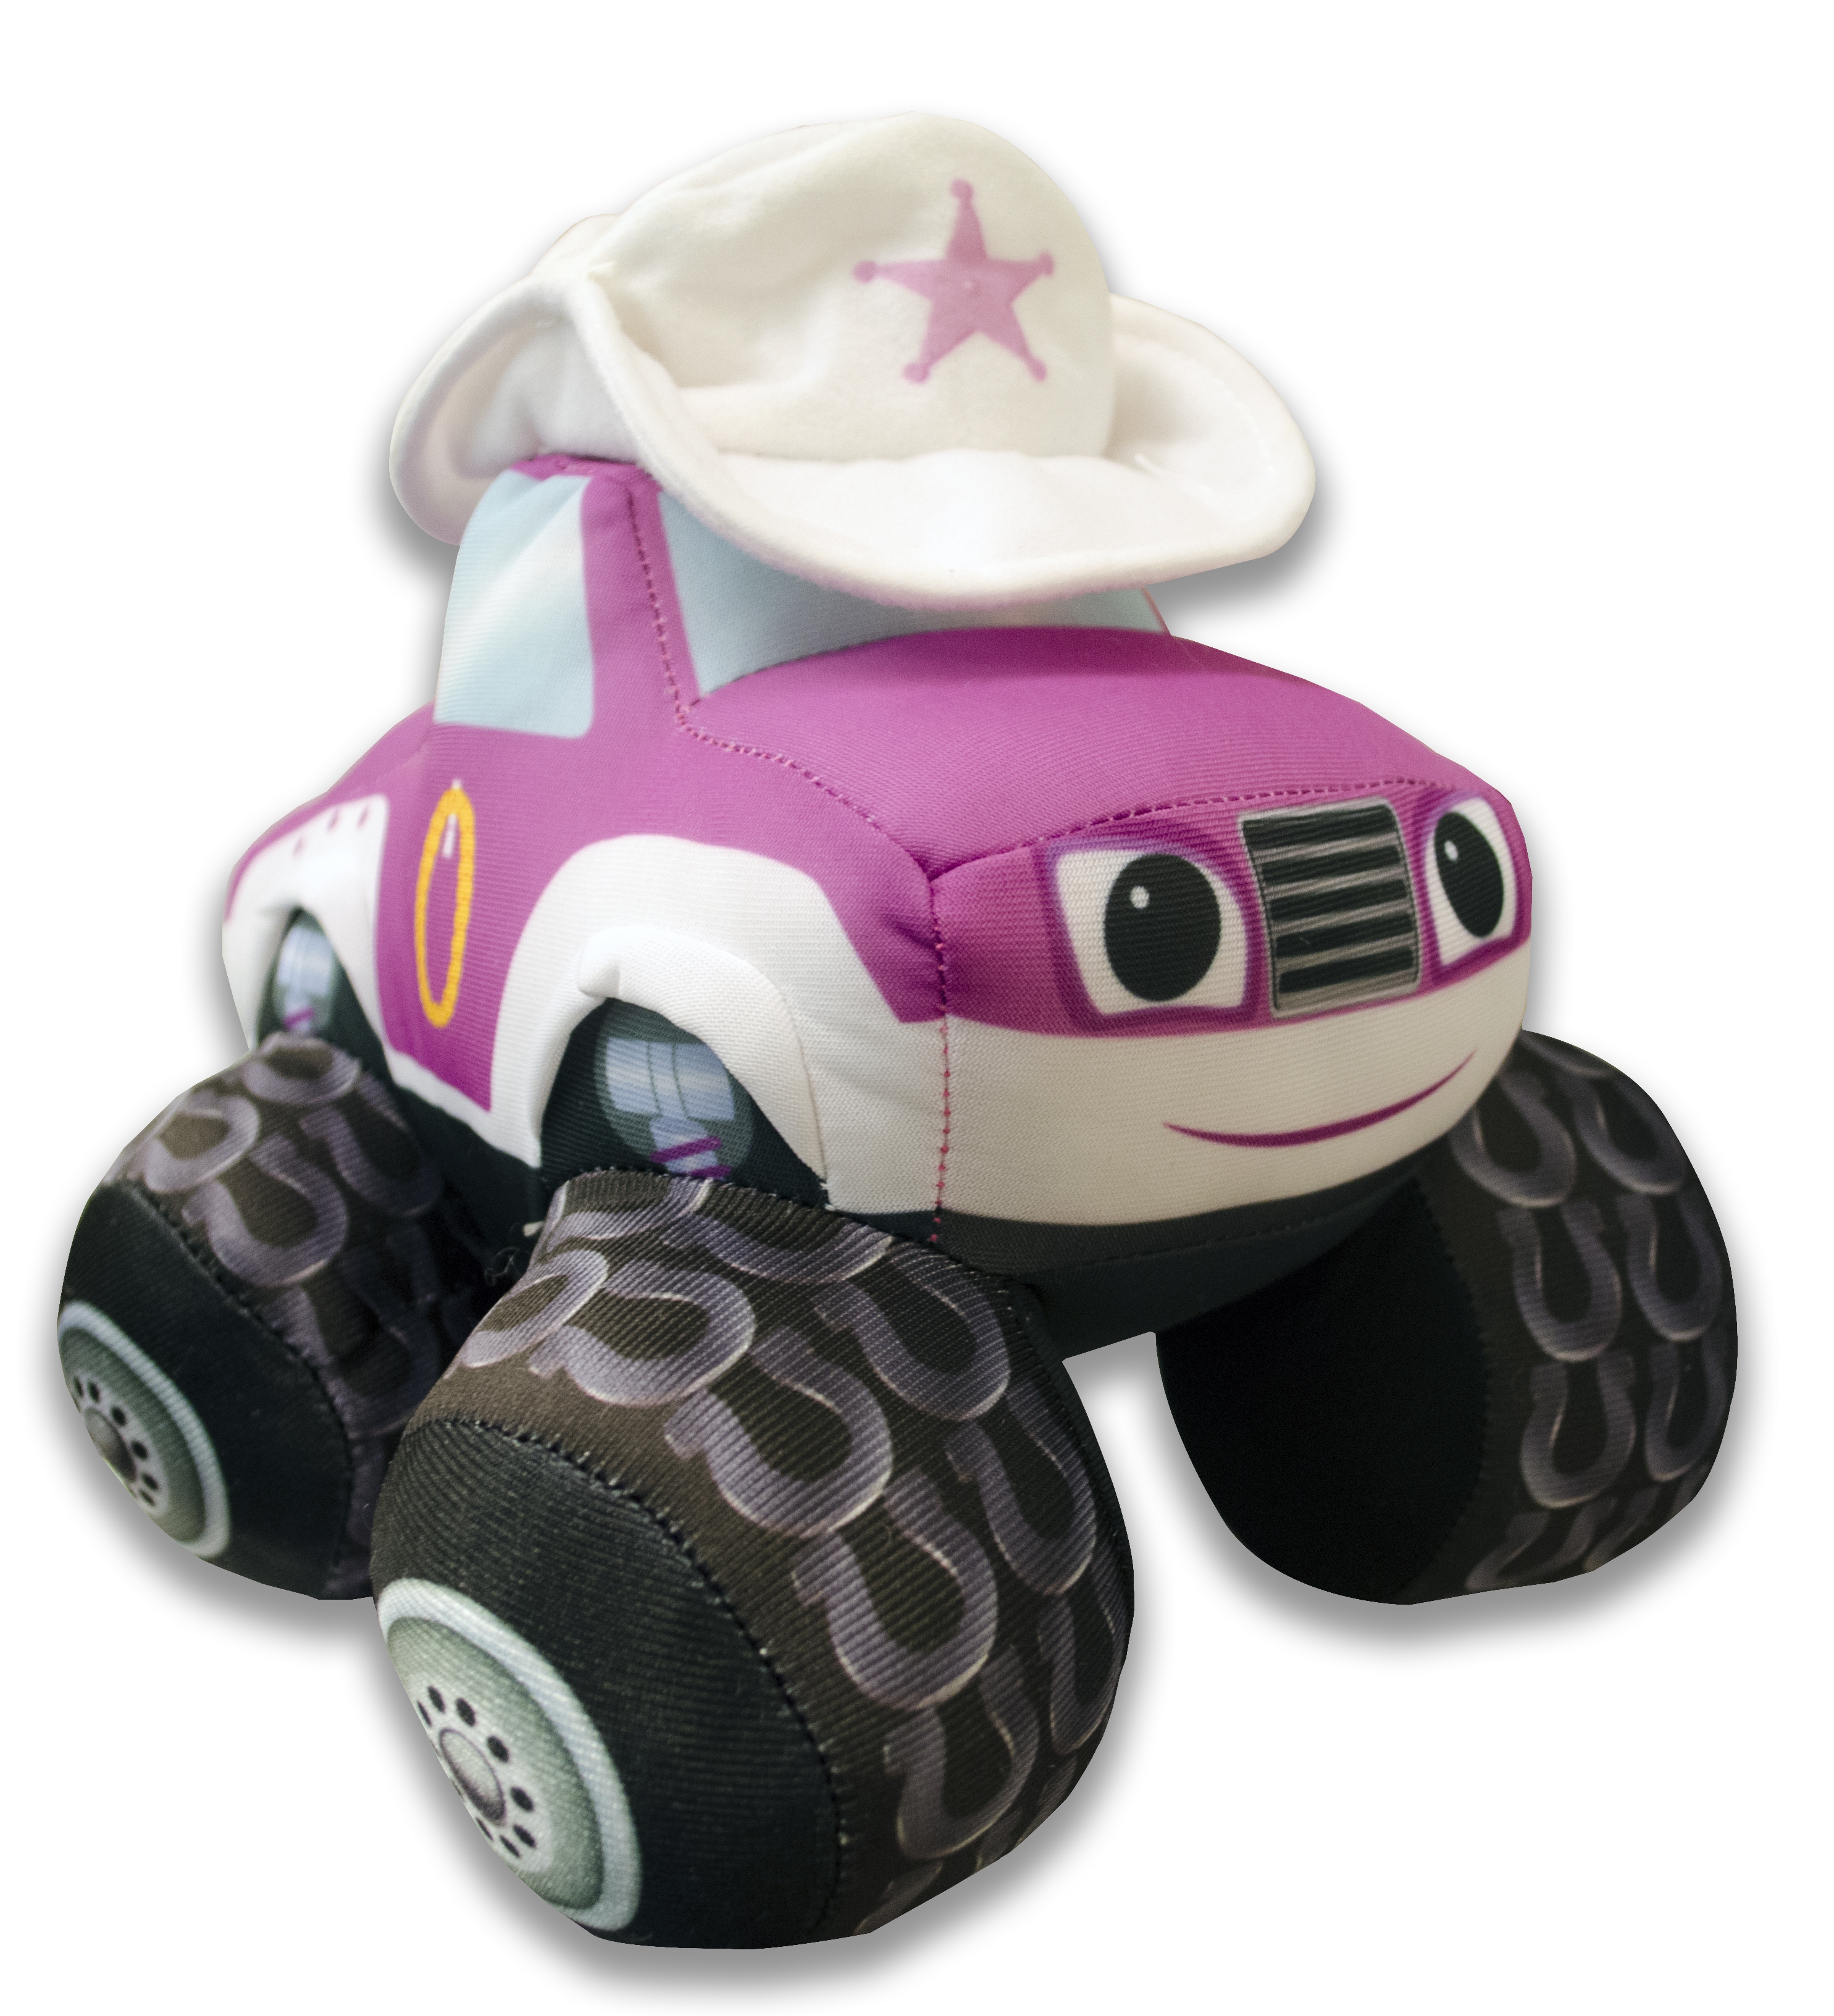 Blaze and The Monster Machines 'Starla' 21cm Plush Soft Toy